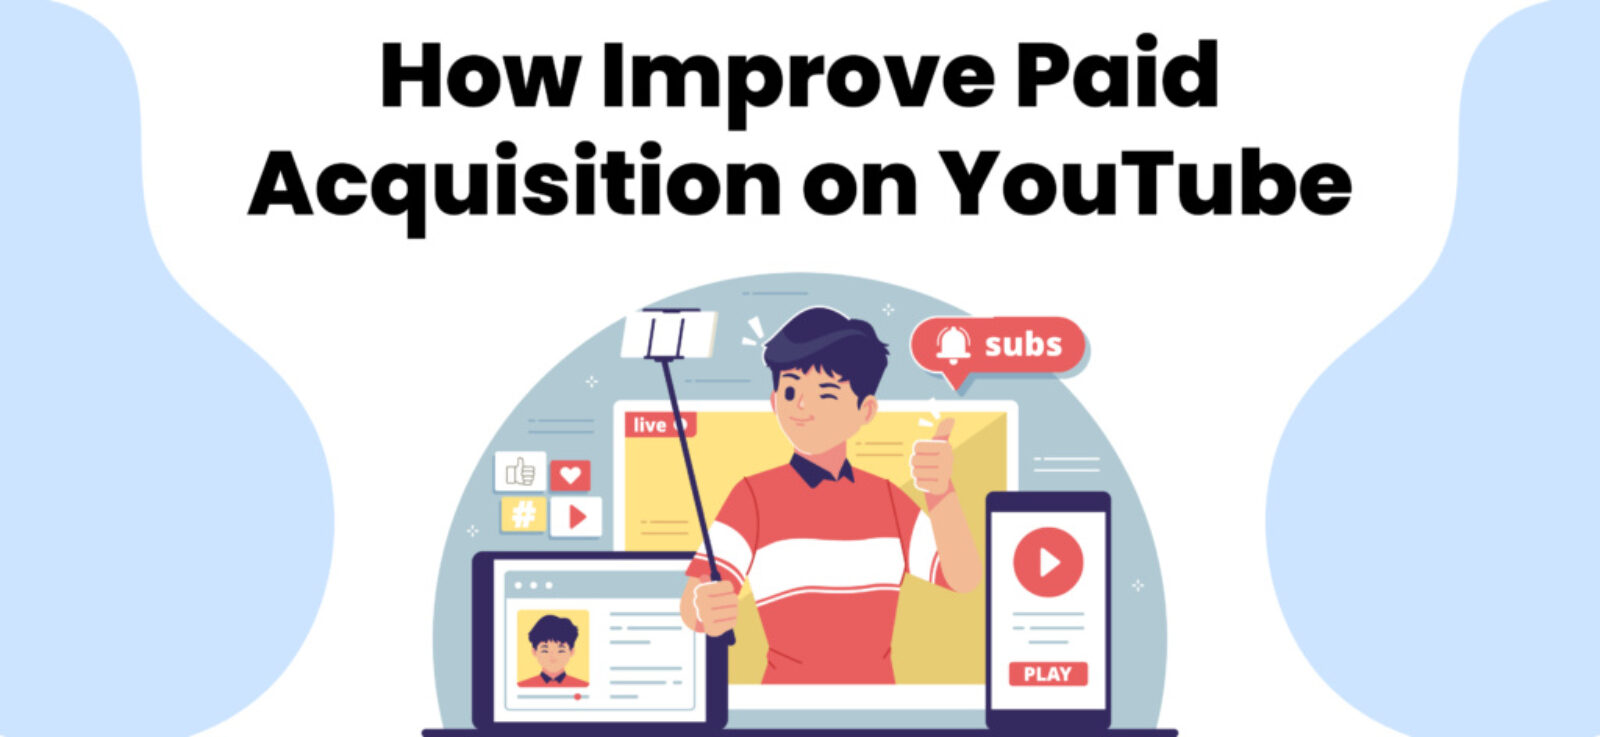 How Improve paid acquisition on YouTube